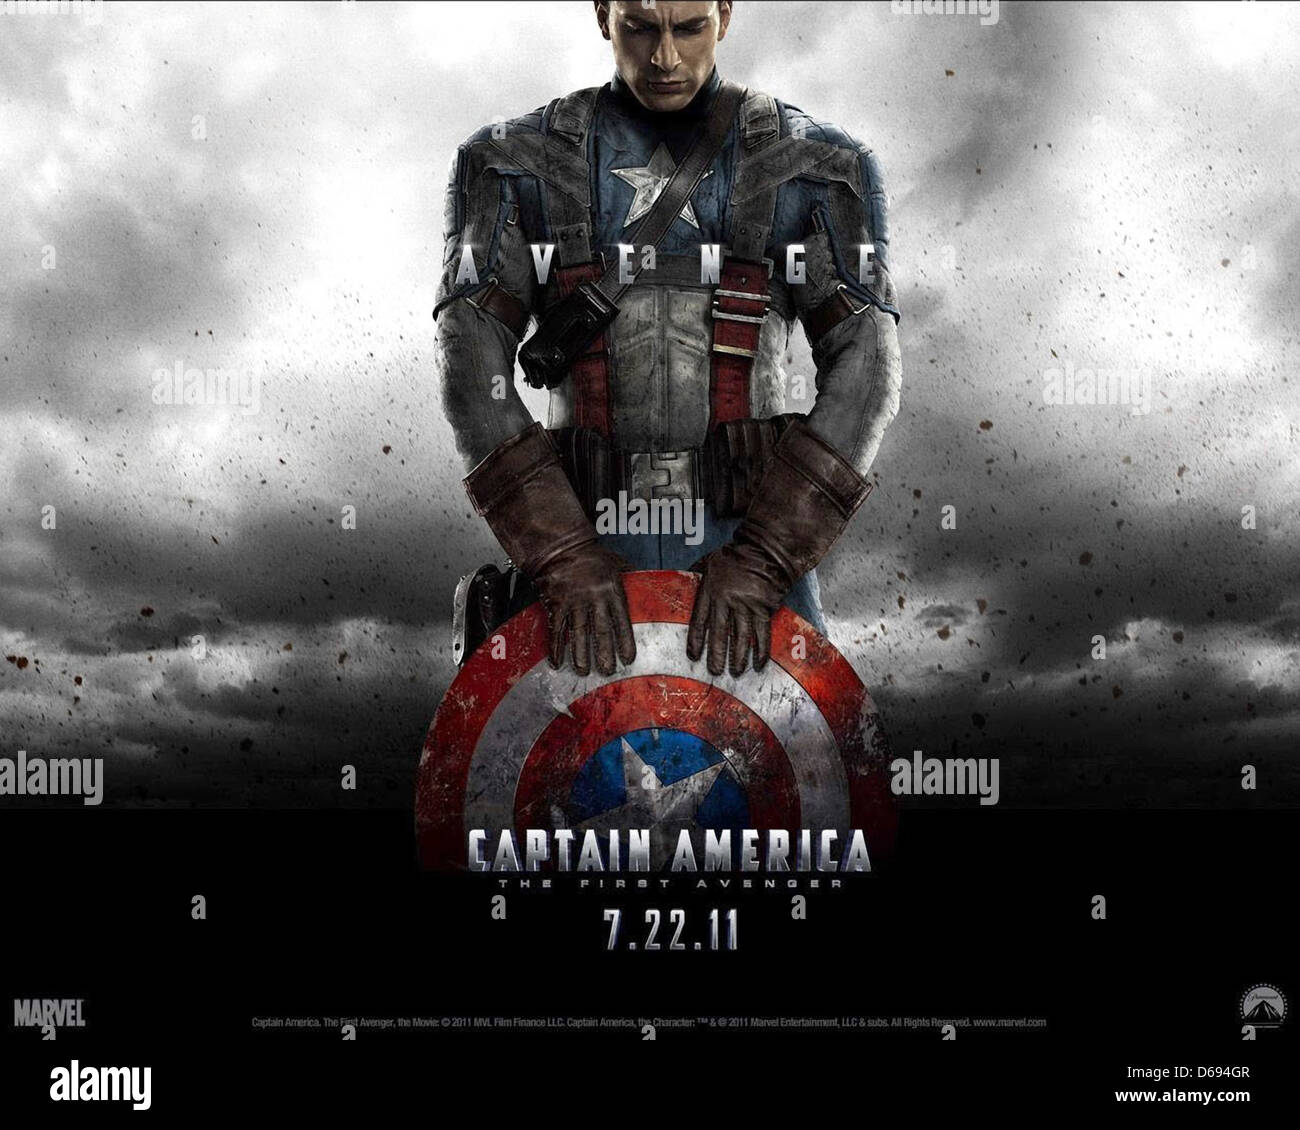 Download film captain america the first avengers